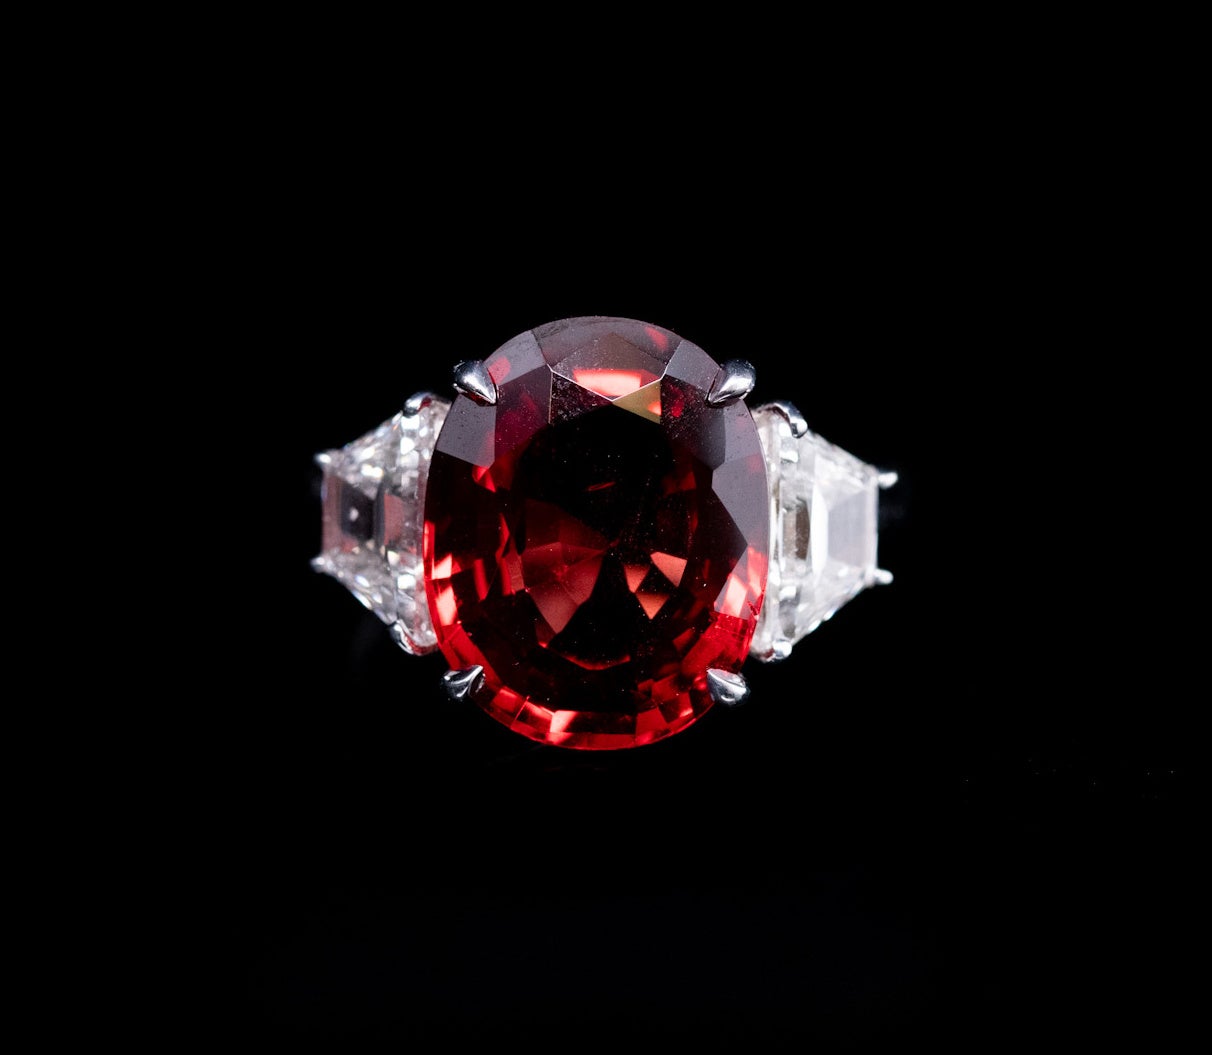 This beautiful, Large and rare Red Spinel is set in a platinum ring with 
2 side diamonds = 1.34cttw
This Red Spinel is GIA certified #5191073660



